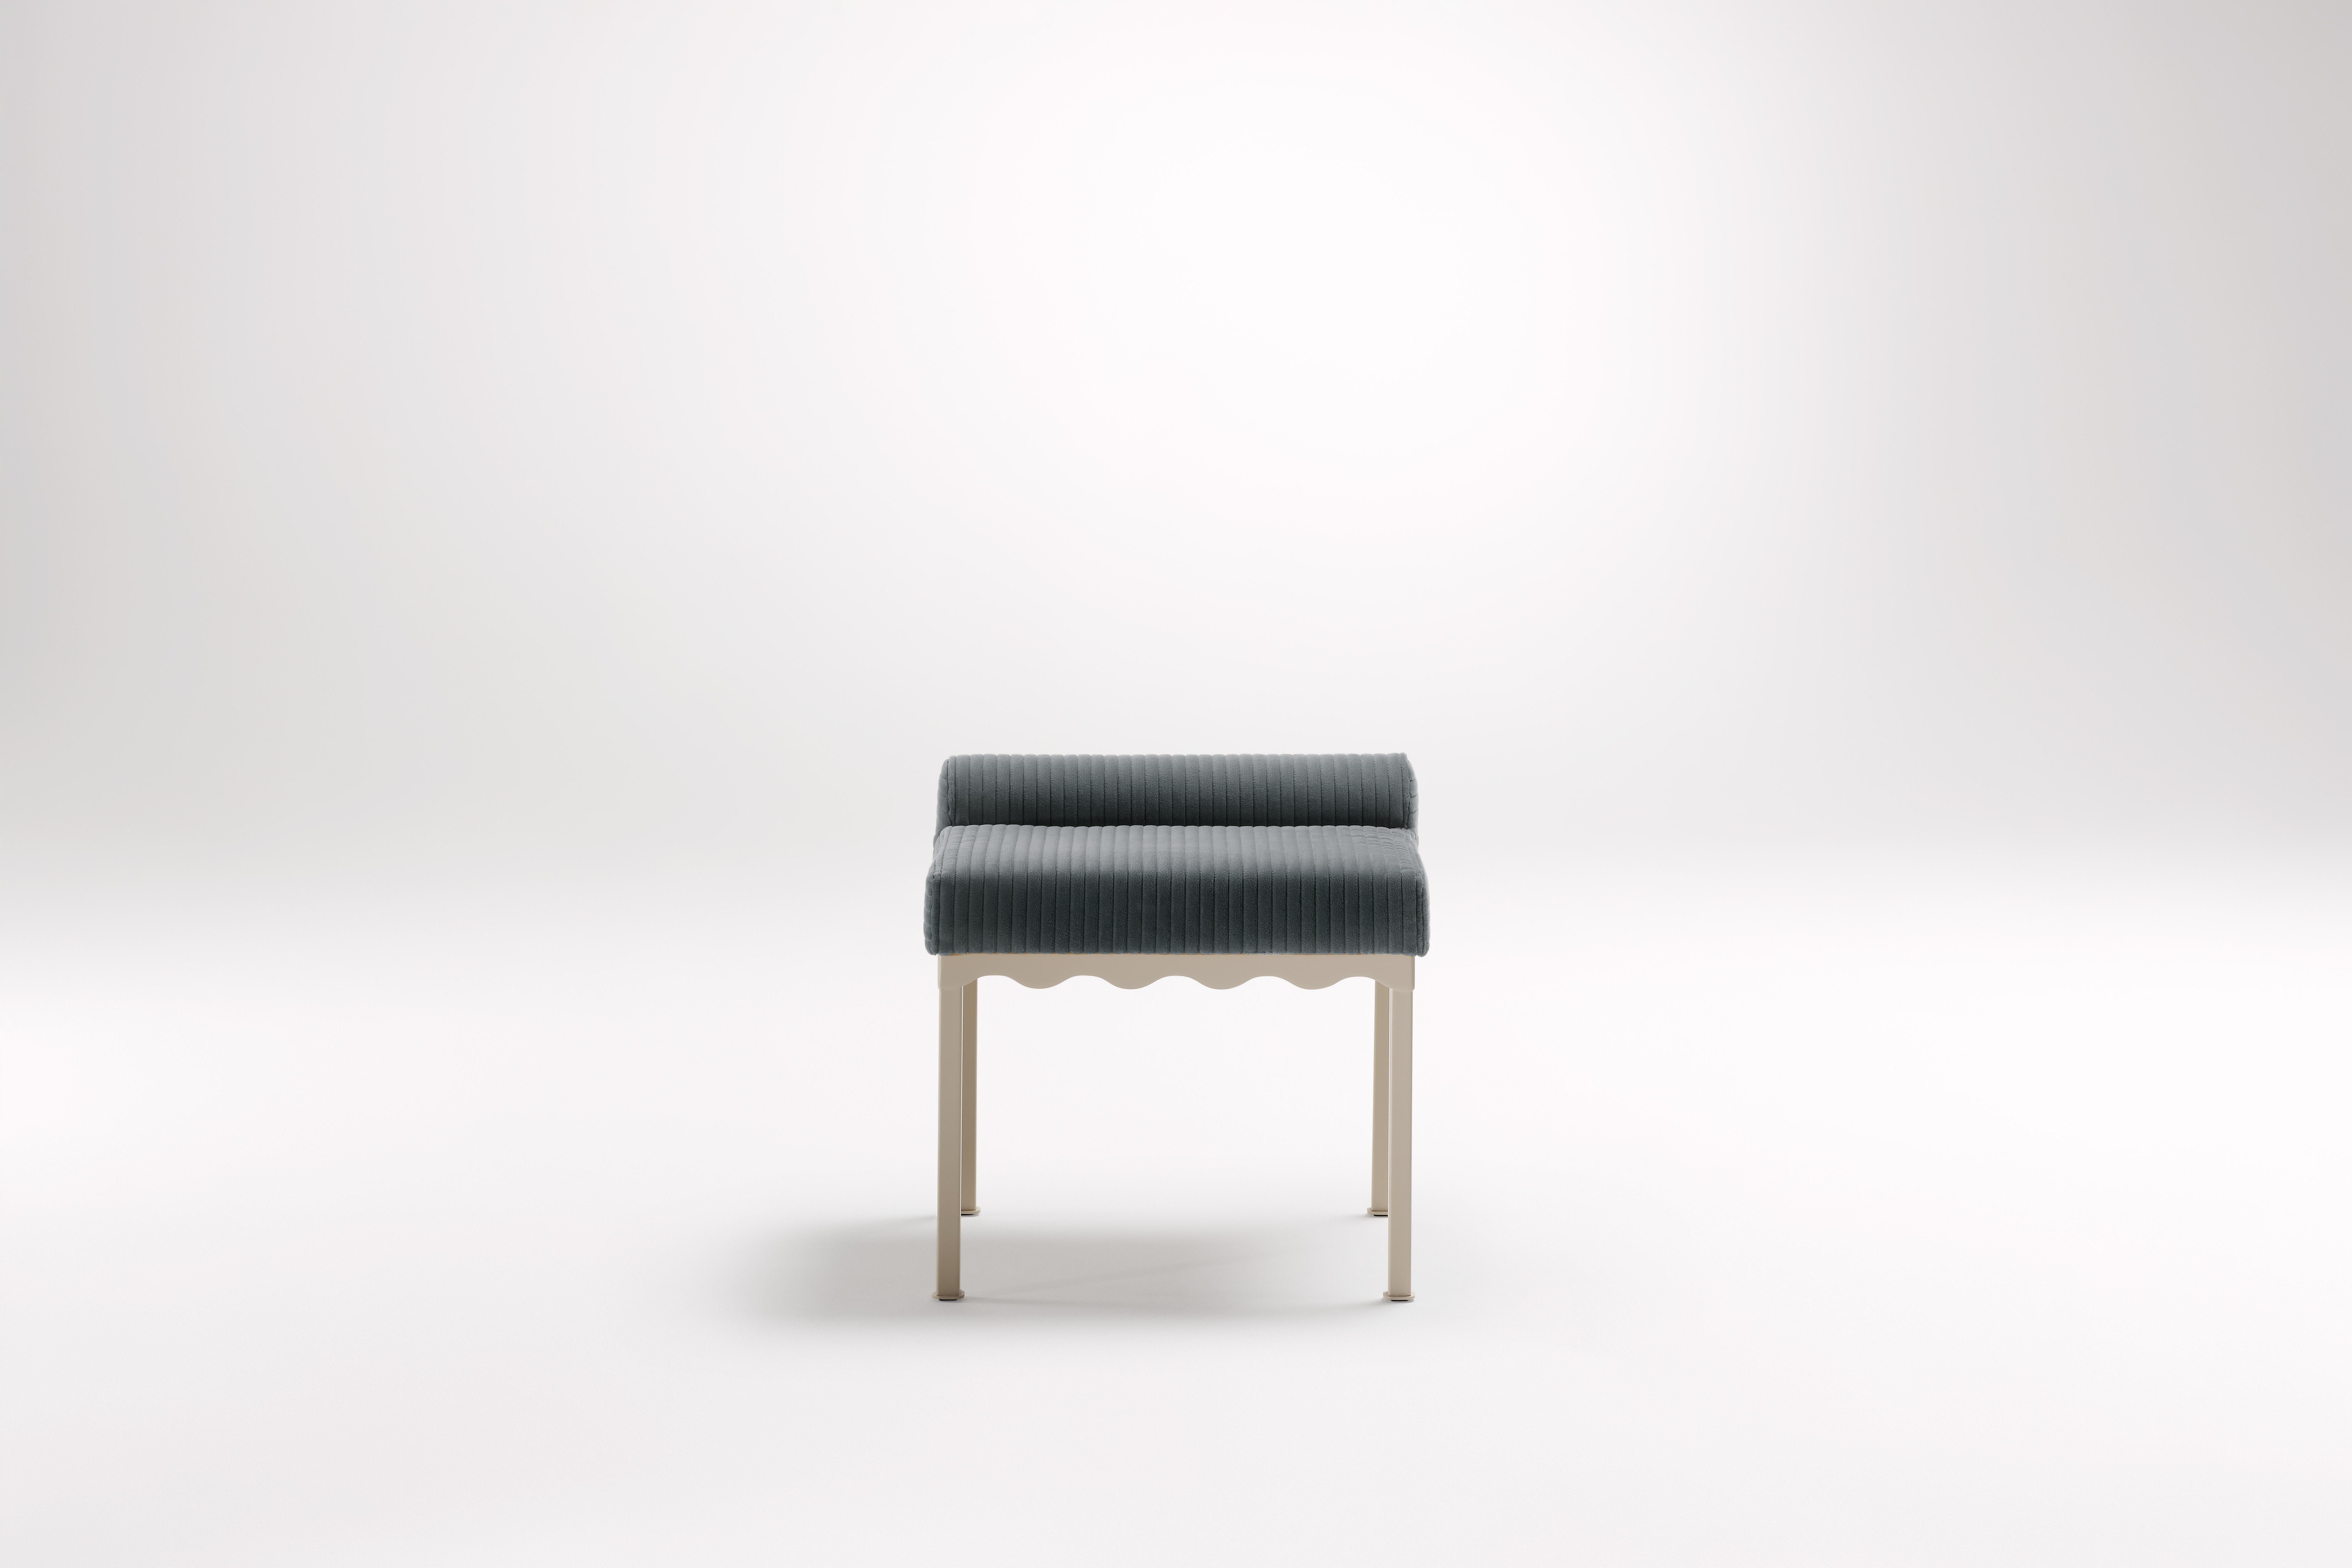 Marmoset Bellini 540 Bench by Coco Flip
Dimensions: D 54 x W 54 x H 52.5 cm
Materials: Timber / Upholstered tops, Powder-coated steel frame. 
Weight: 12 kg
Frame Finishes: Textura Paperbark.

Coco Flip is a Melbourne based furniture and lighting